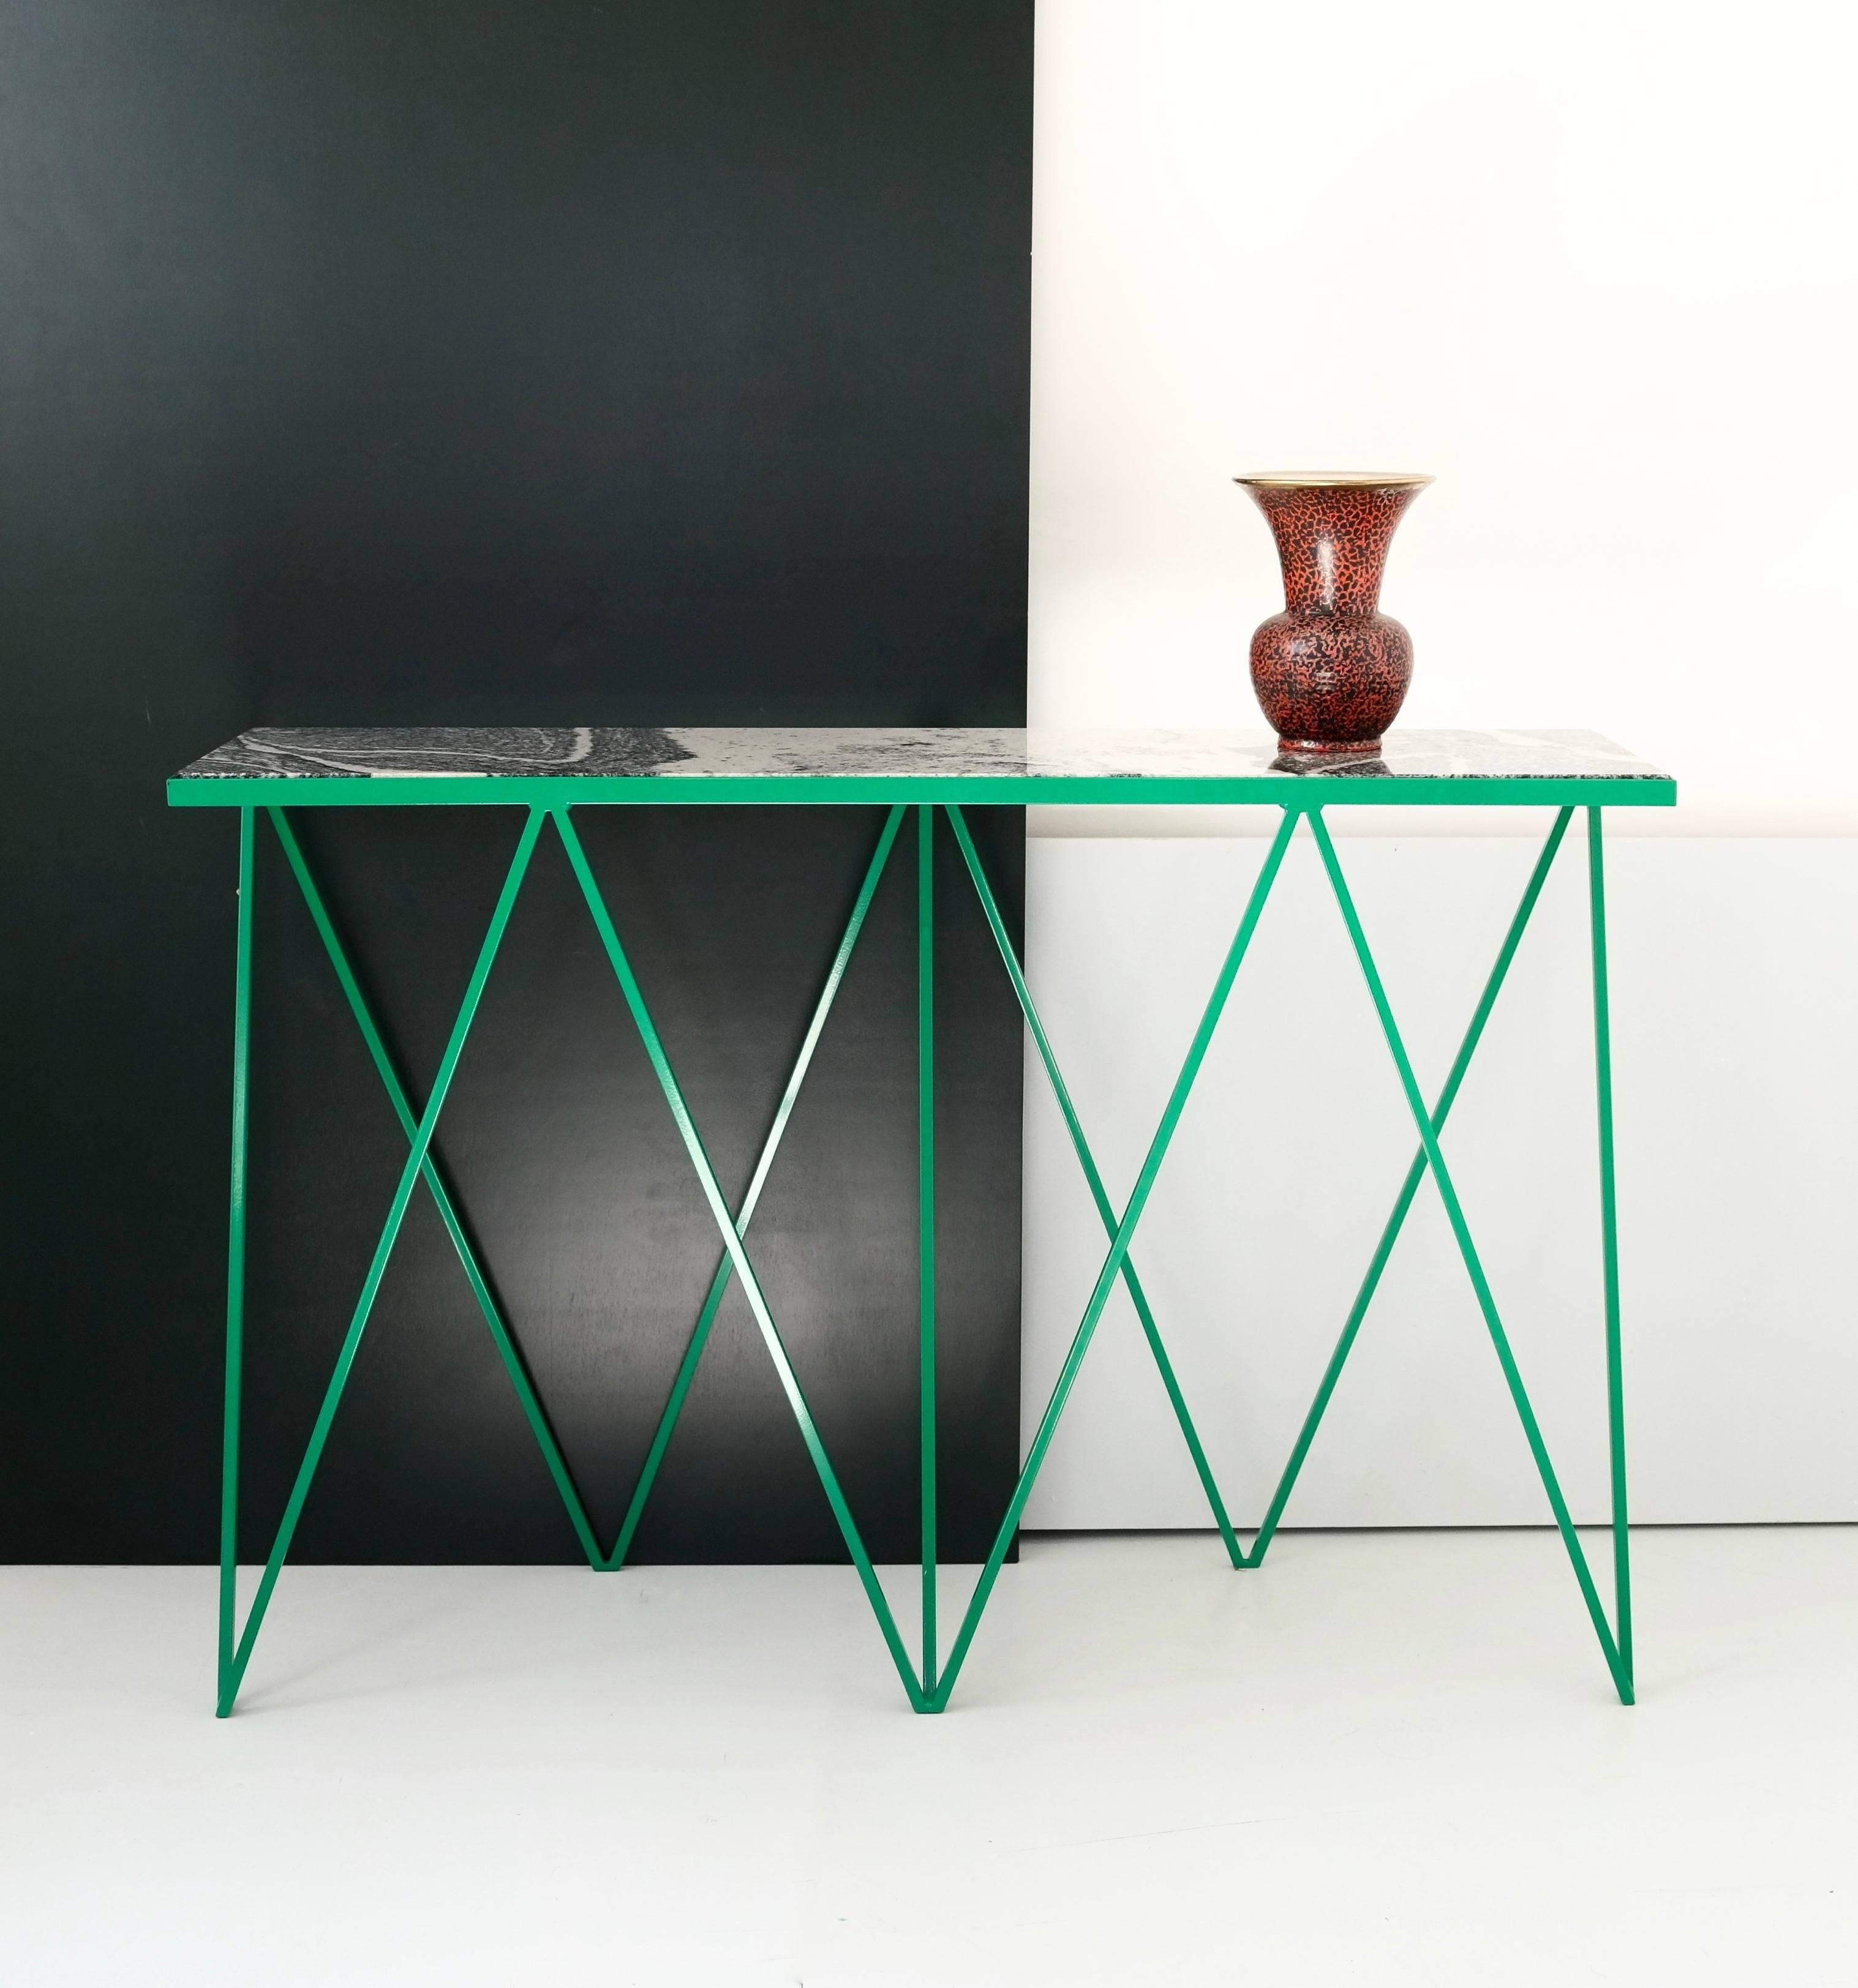 This Giraffe console table is made with a bright green powder coated steel frame and a striking black and white granite stone top. Each table is handmade and each piece of granite is carefully selected, making every console completely unique. This